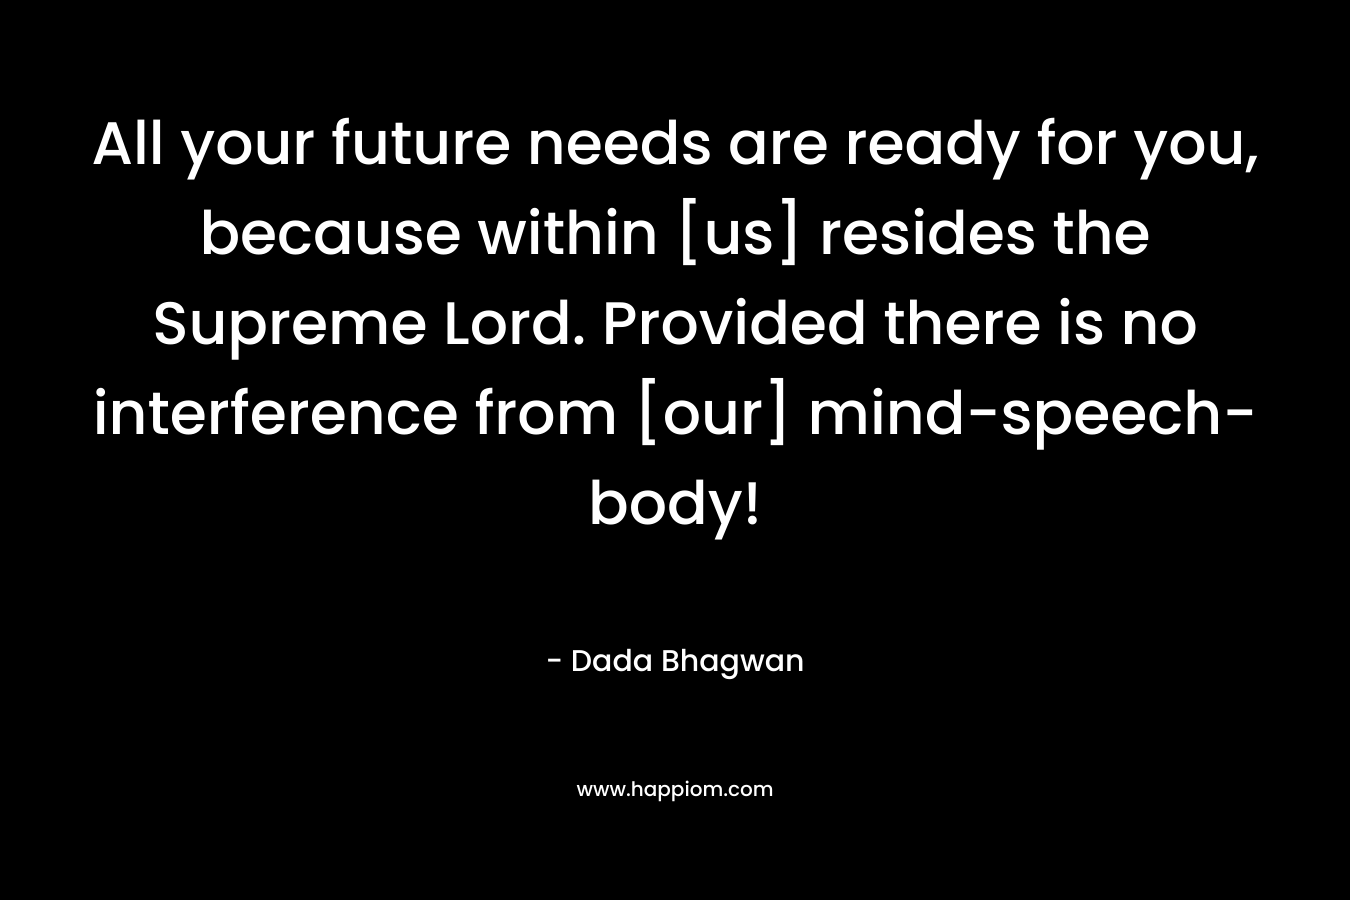 All your future needs are ready for you, because within [us] resides the Supreme Lord. Provided there is no interference from [our] mind-speech-body!